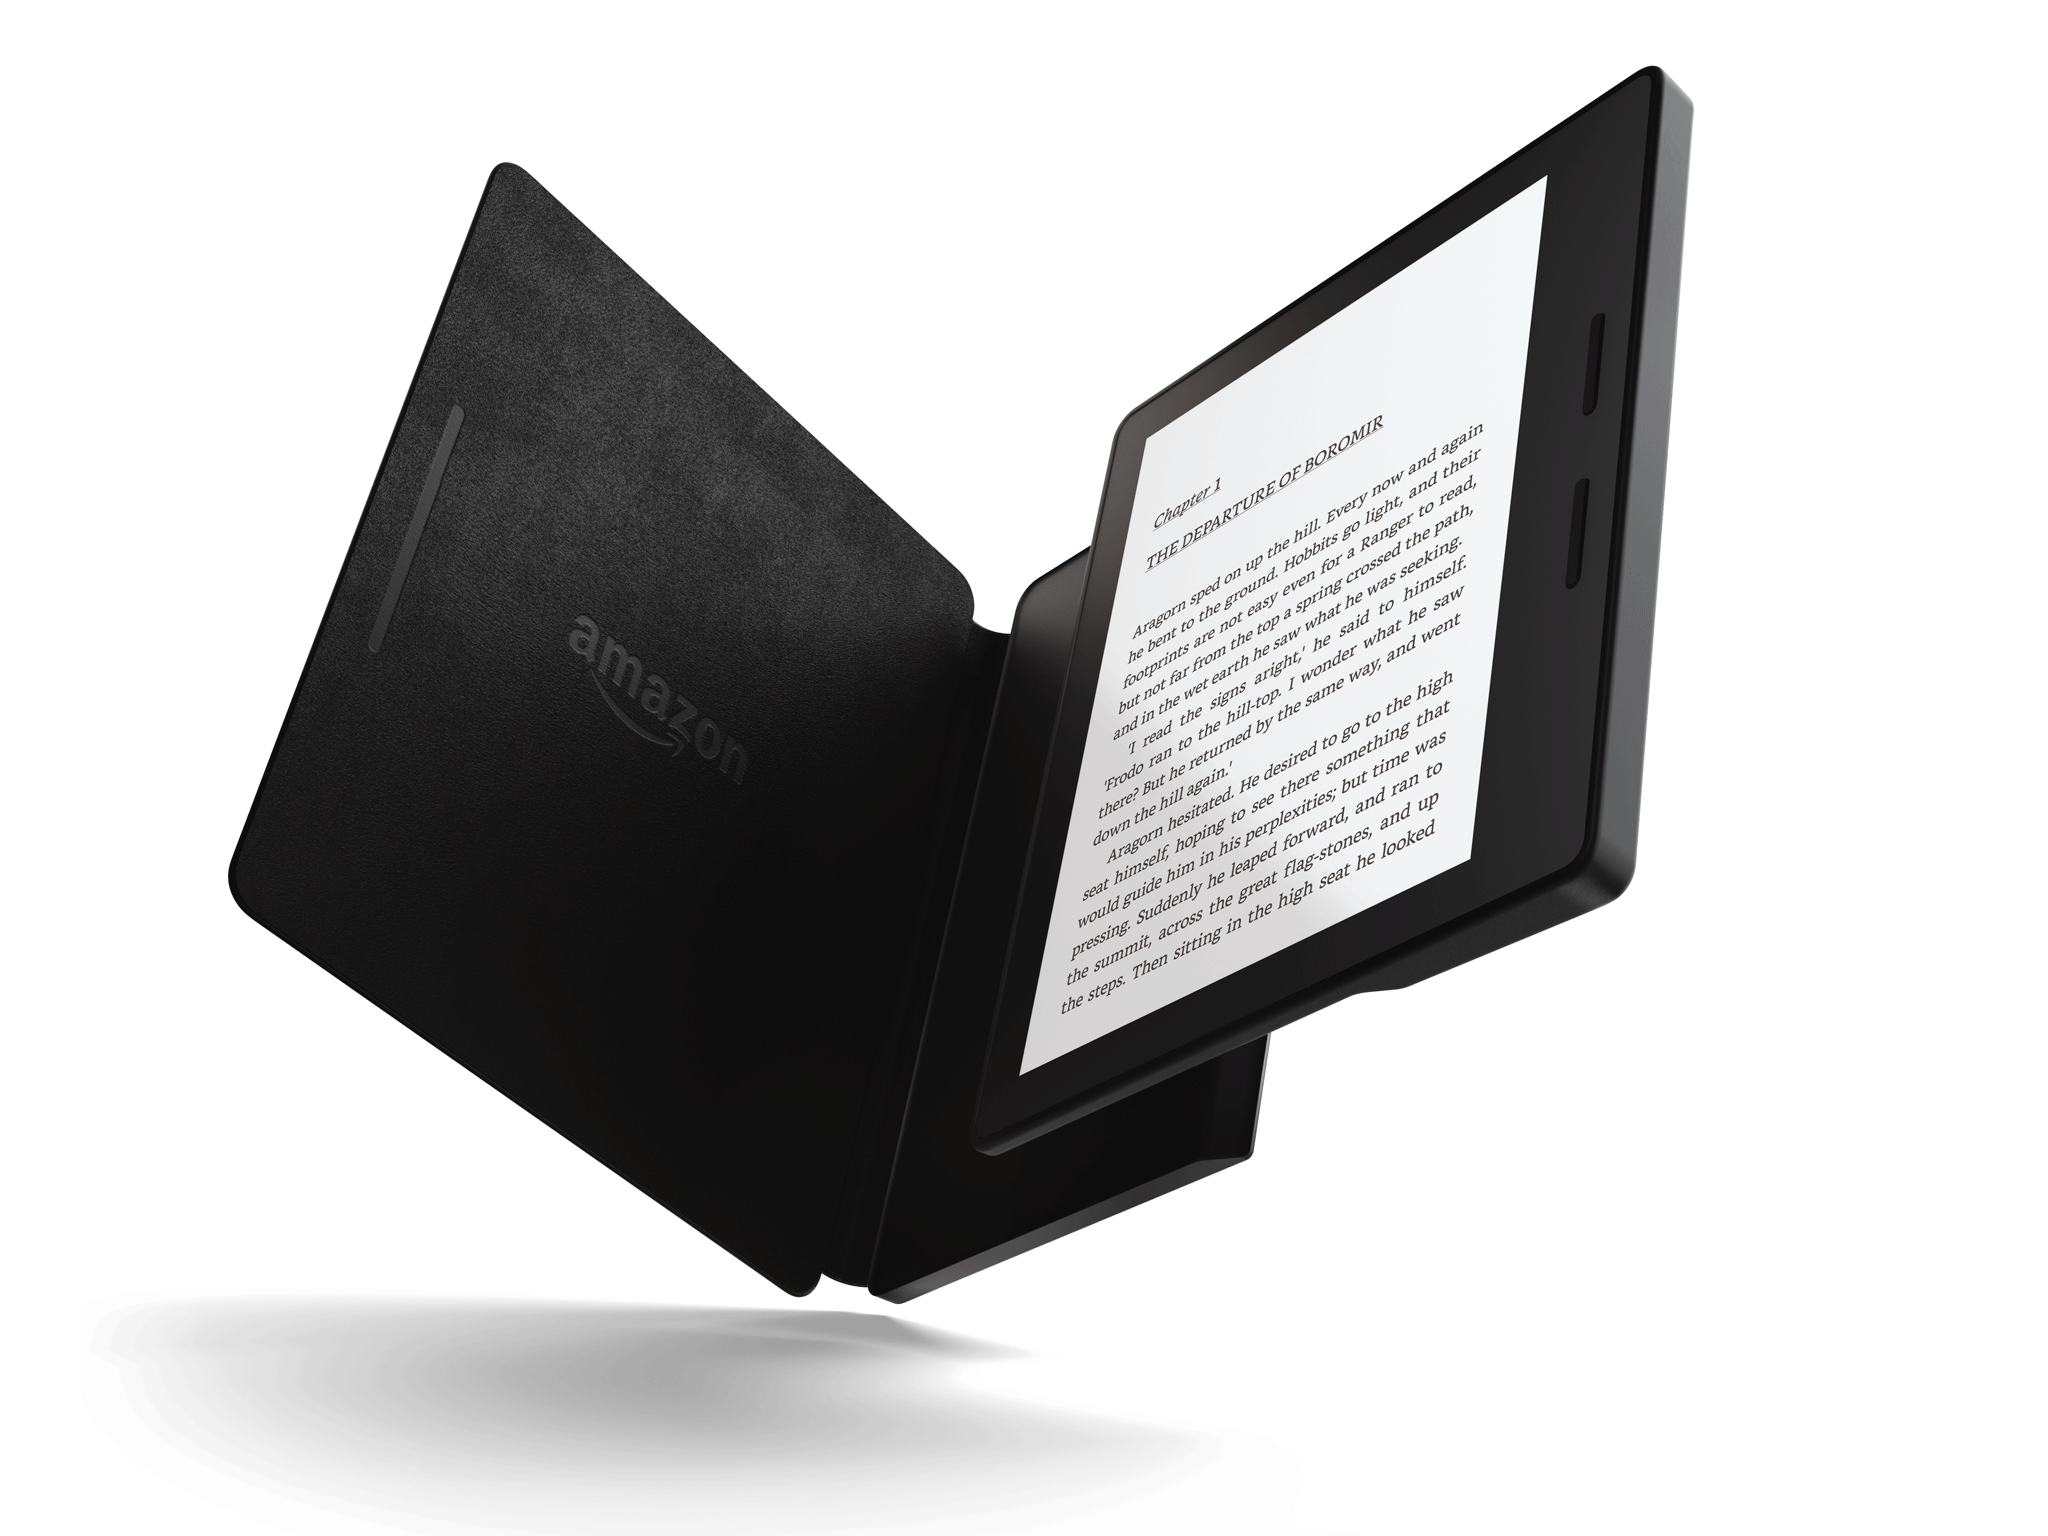 The new Kindle Oasis is now available to pre-order